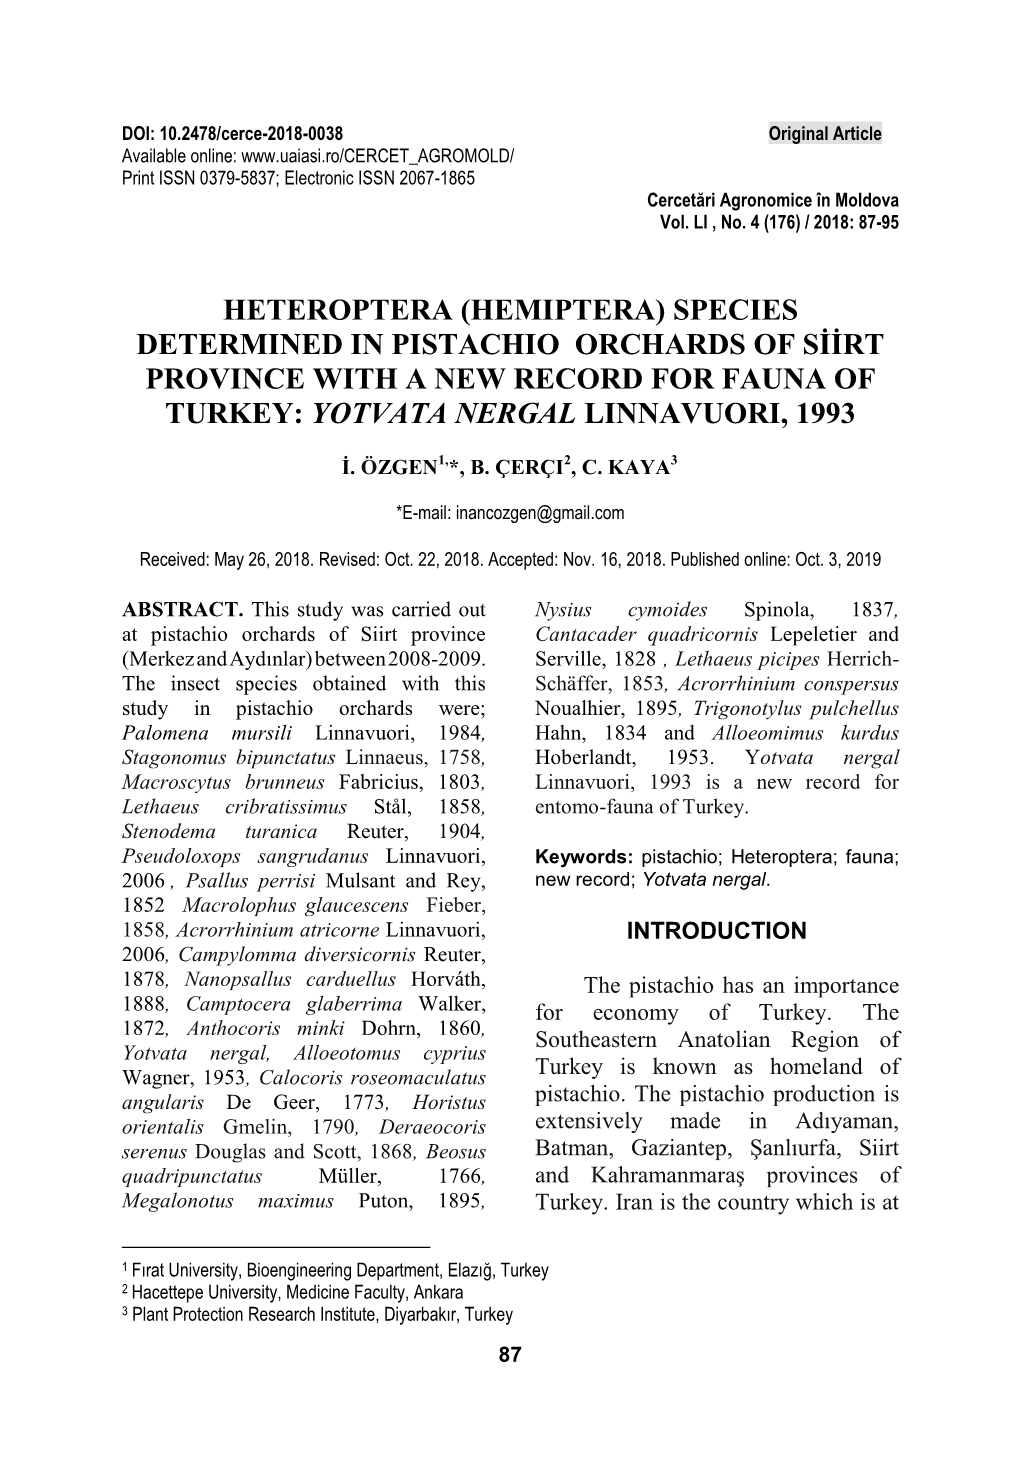 Heteroptera (Hemiptera) Species Determined in Pistachio Orchards of Siirt Province with a New Record for Fauna of Turkey: Yotvata Nergal Linnavuori, 1993